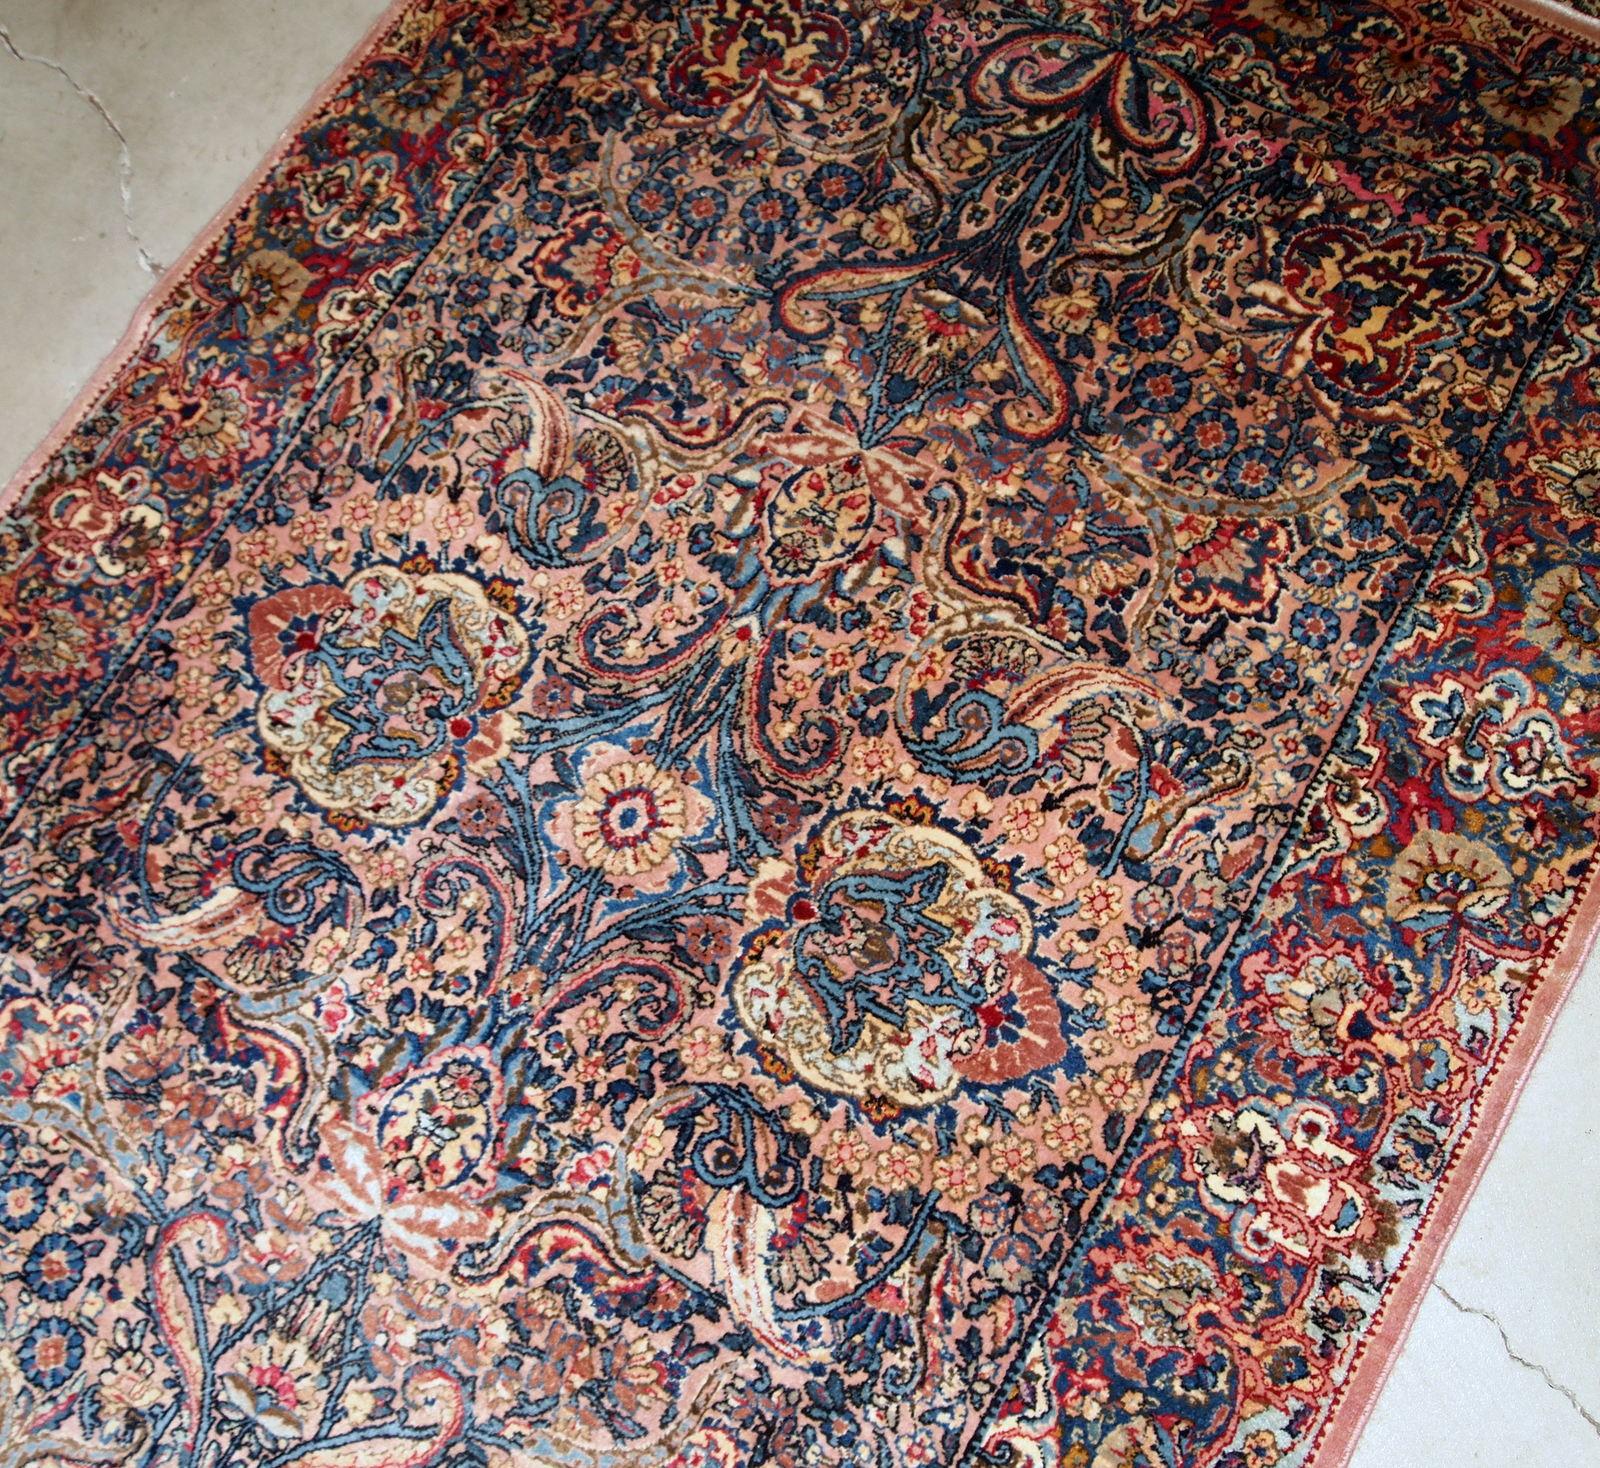 Hand made antique Kerman style rug in original good condition. The rug made in the beginning of 20th century in wool.

-condition: original good,

-circa: 1920s,

-size: 4.2' x 6.10' (128cm x 211cm),

-material: wool,

-country of origin: